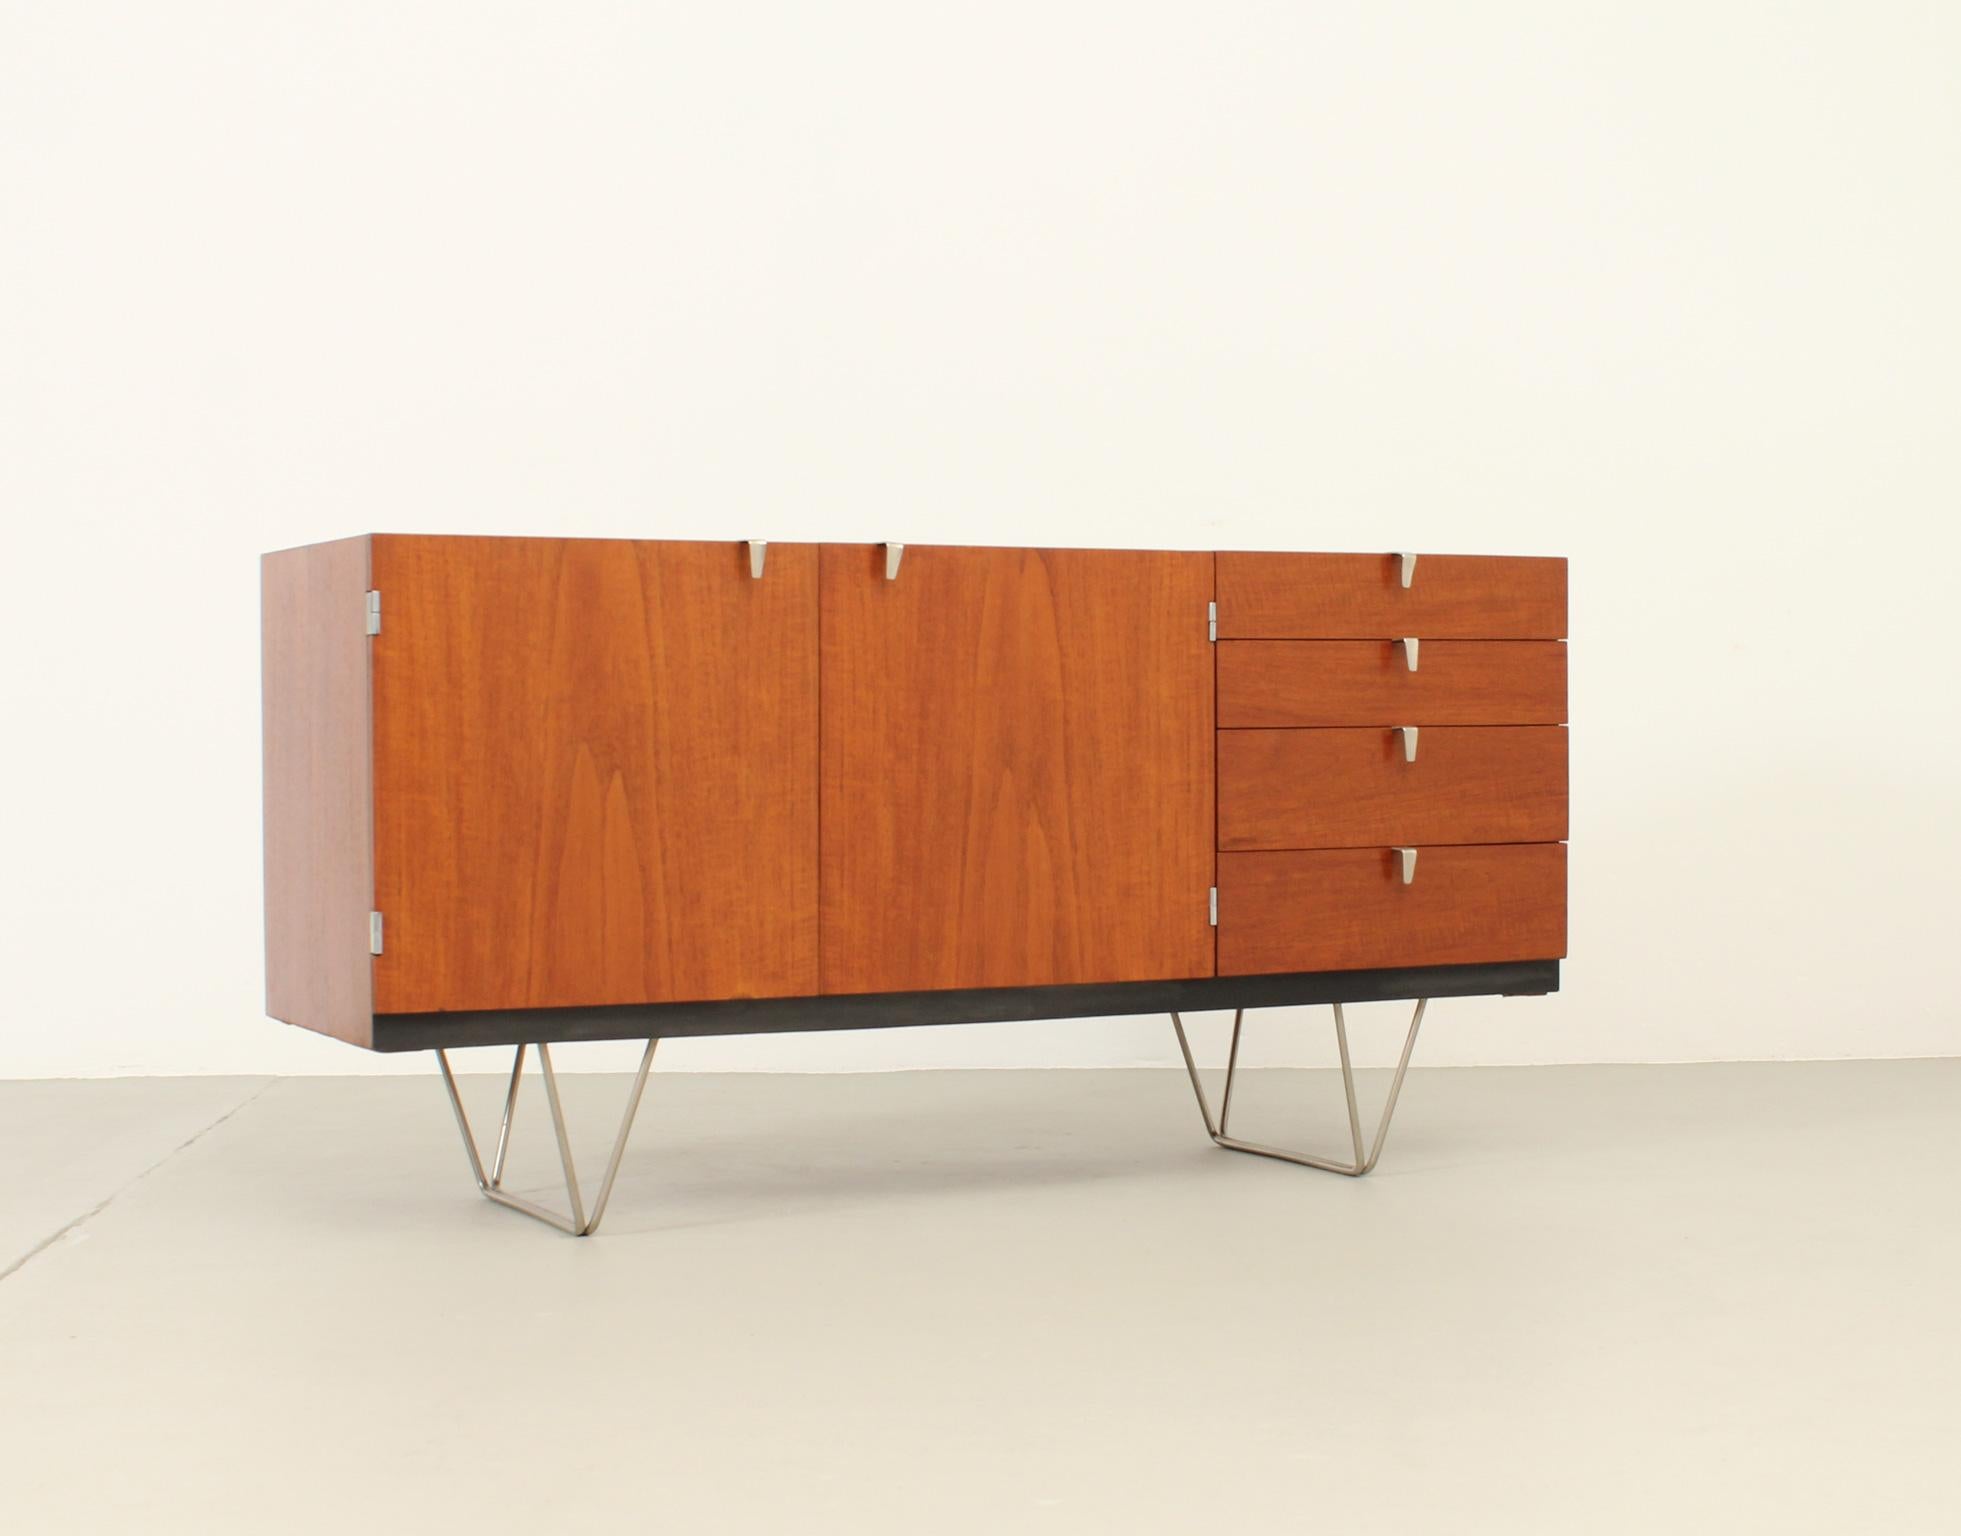 S Range sideboard designed in 1959 by John and Sylvia Reid for Stag Furniture, UK. An icon post-war british design. Teak wood with beech interior and polished steel bases and handles. Two doors and four drawers with two pull out trays inside. Signed